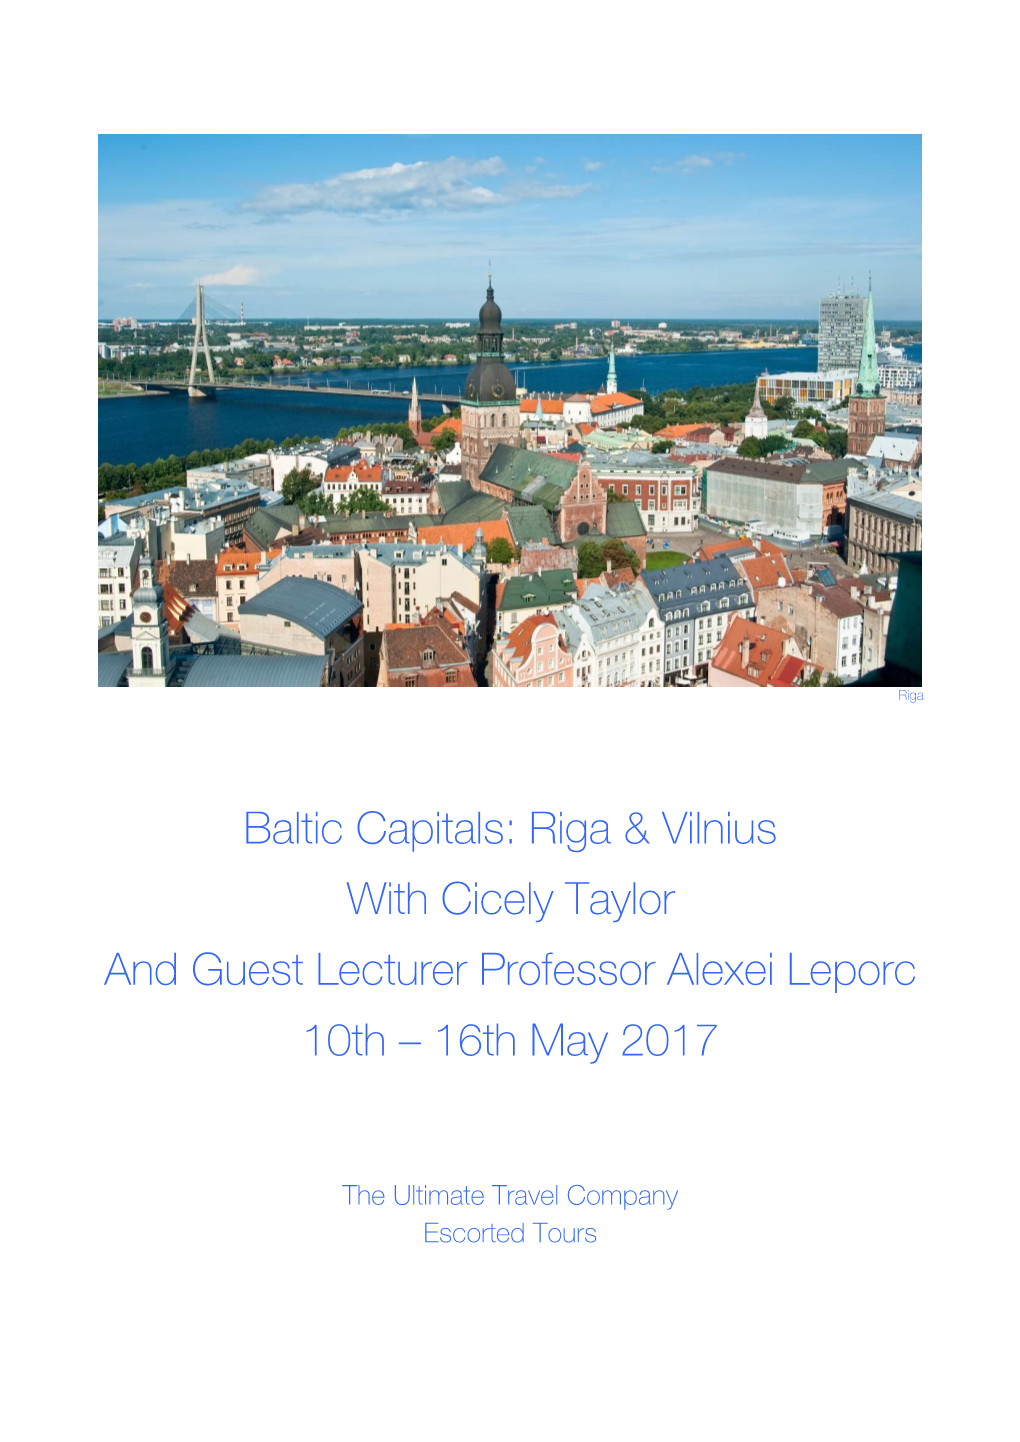 Baltic Capitals: Riga & Vilnius with Cicely Taylor and Guest Lecturer